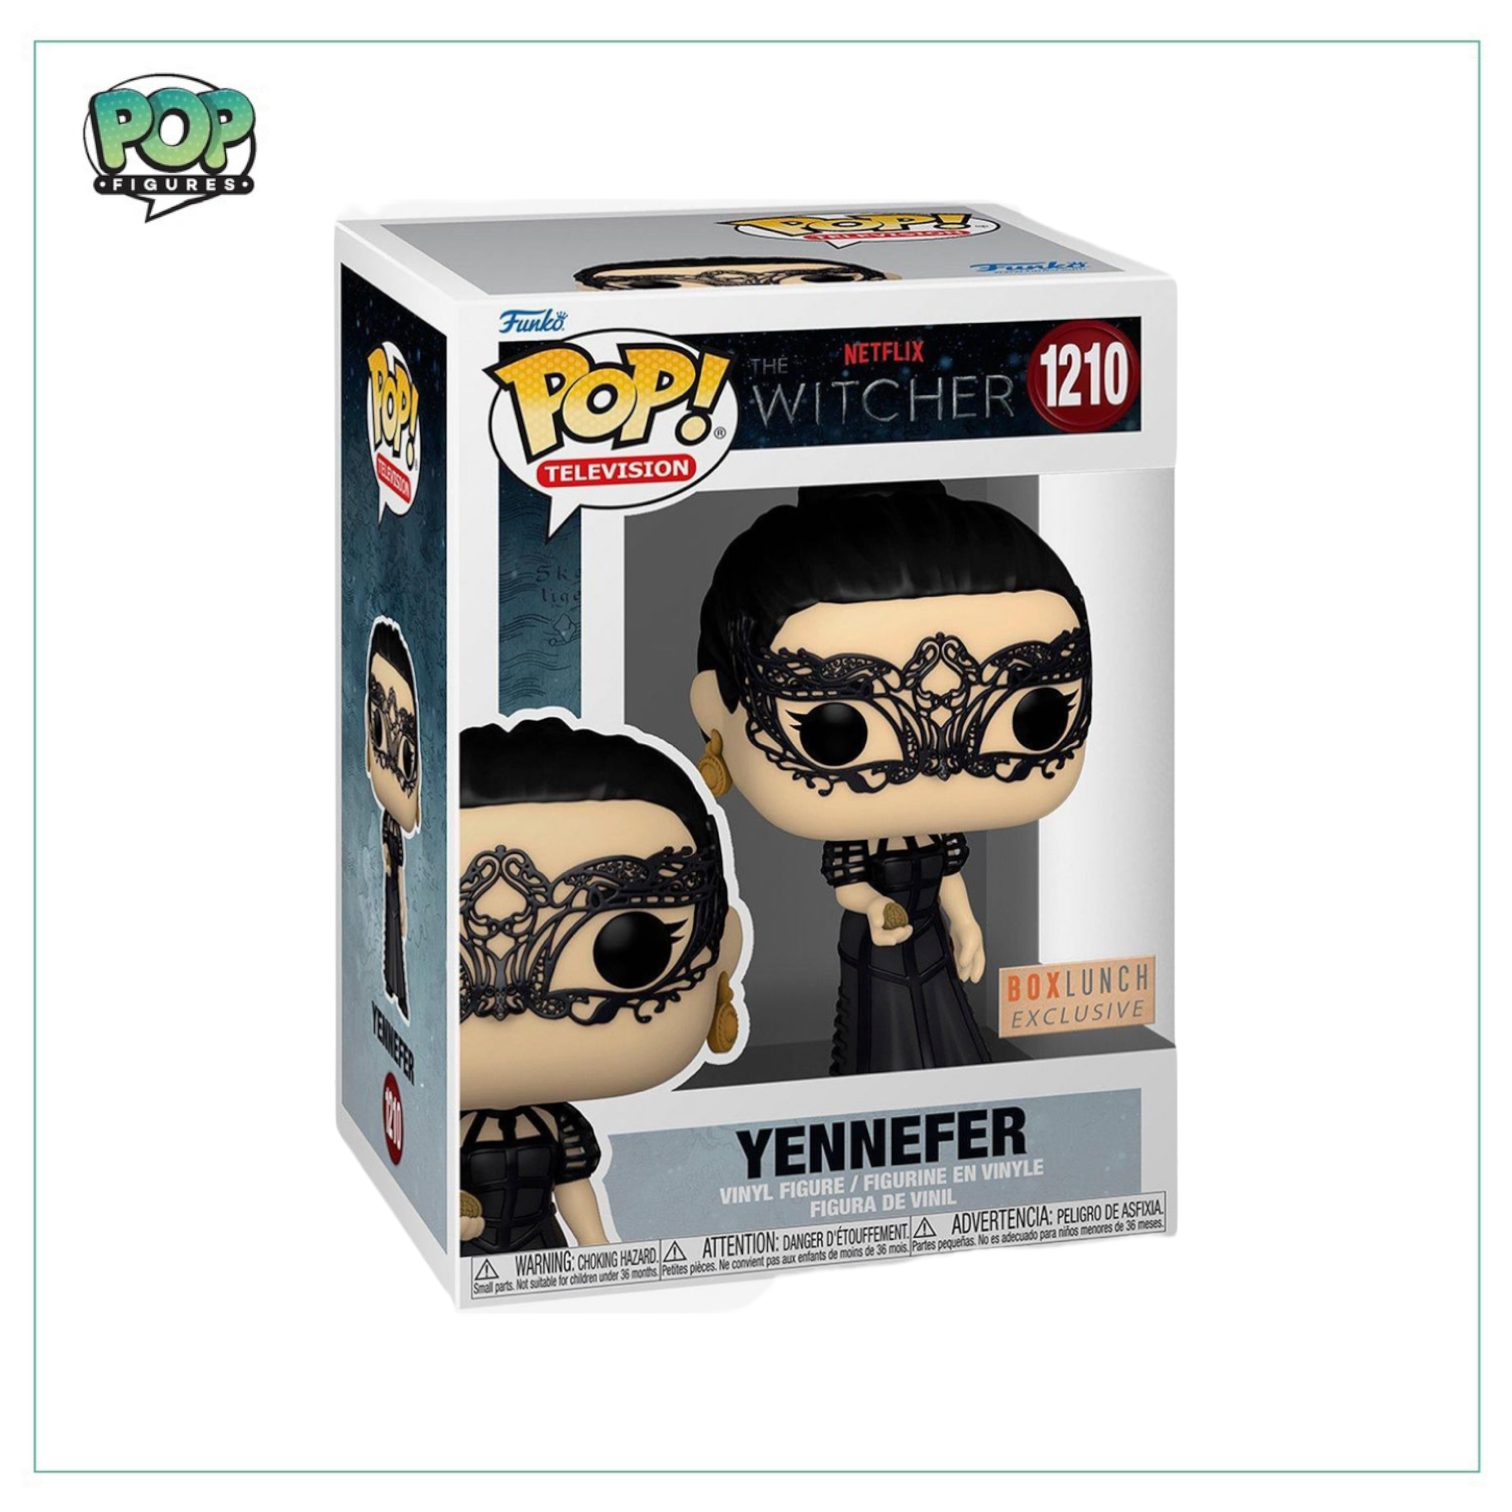 Yennefer #1210 Funko Pop! The Witcher - Box Lunch Exclusive